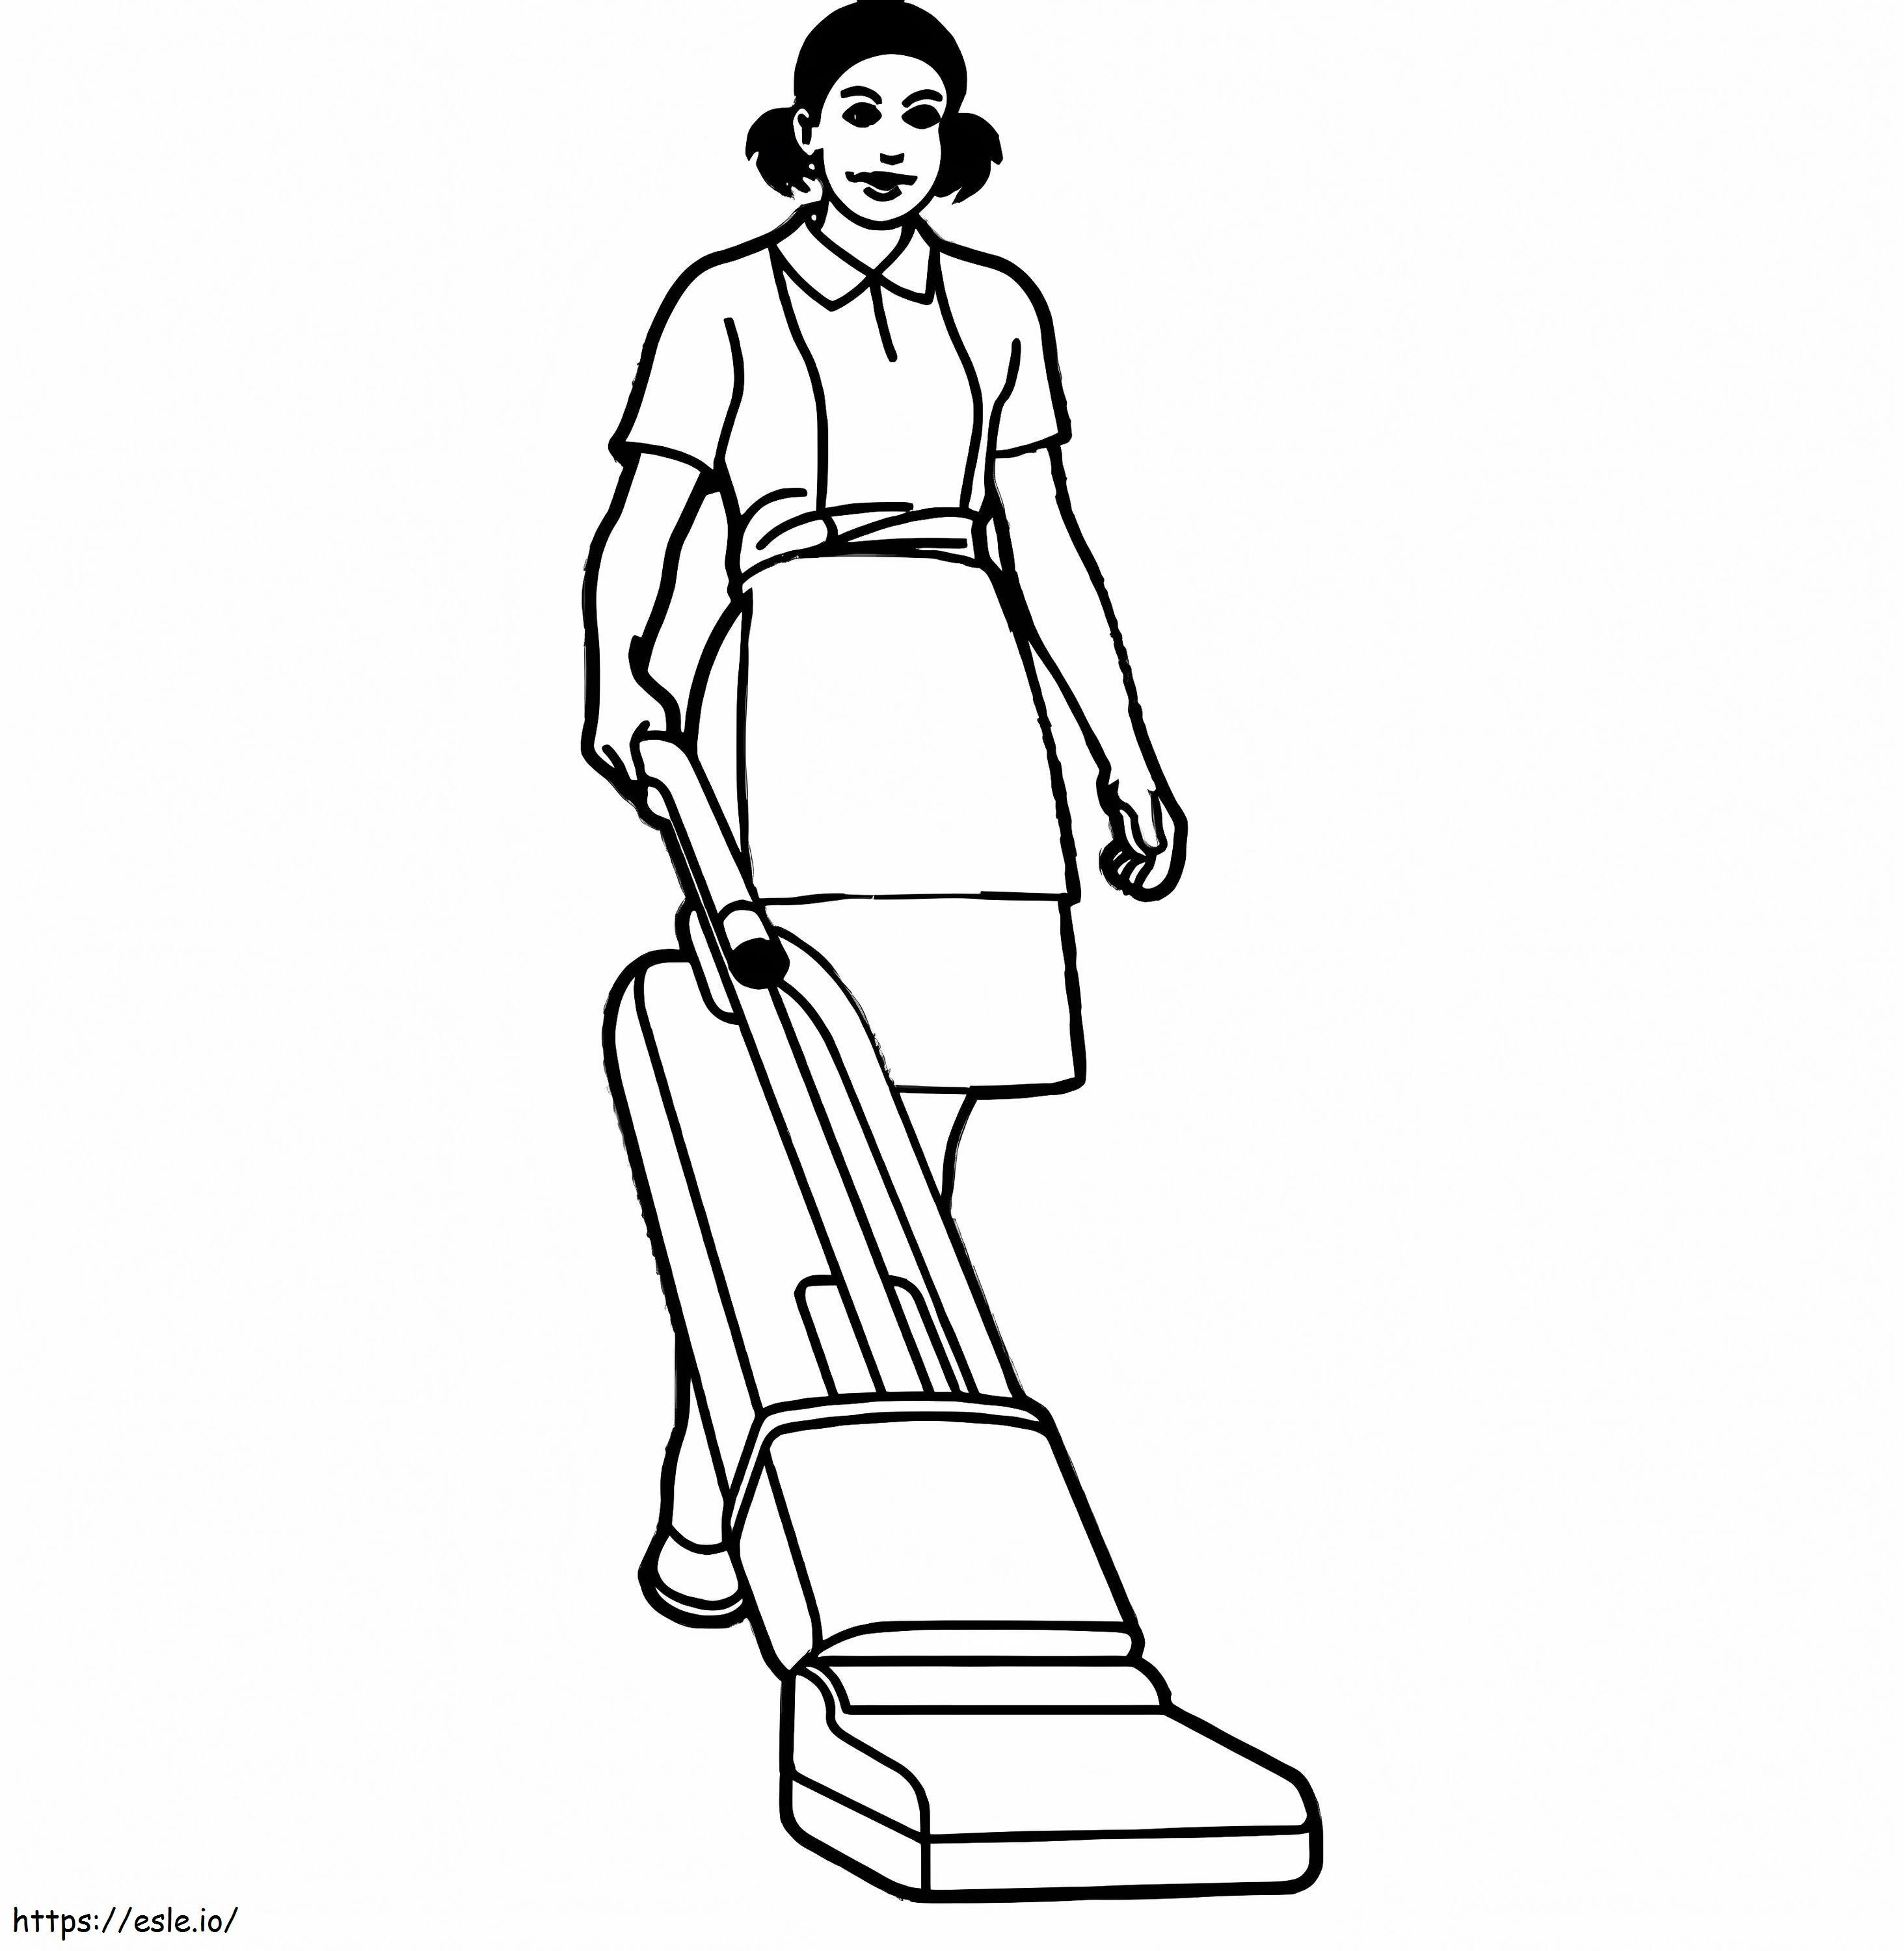 Maid 9 coloring page